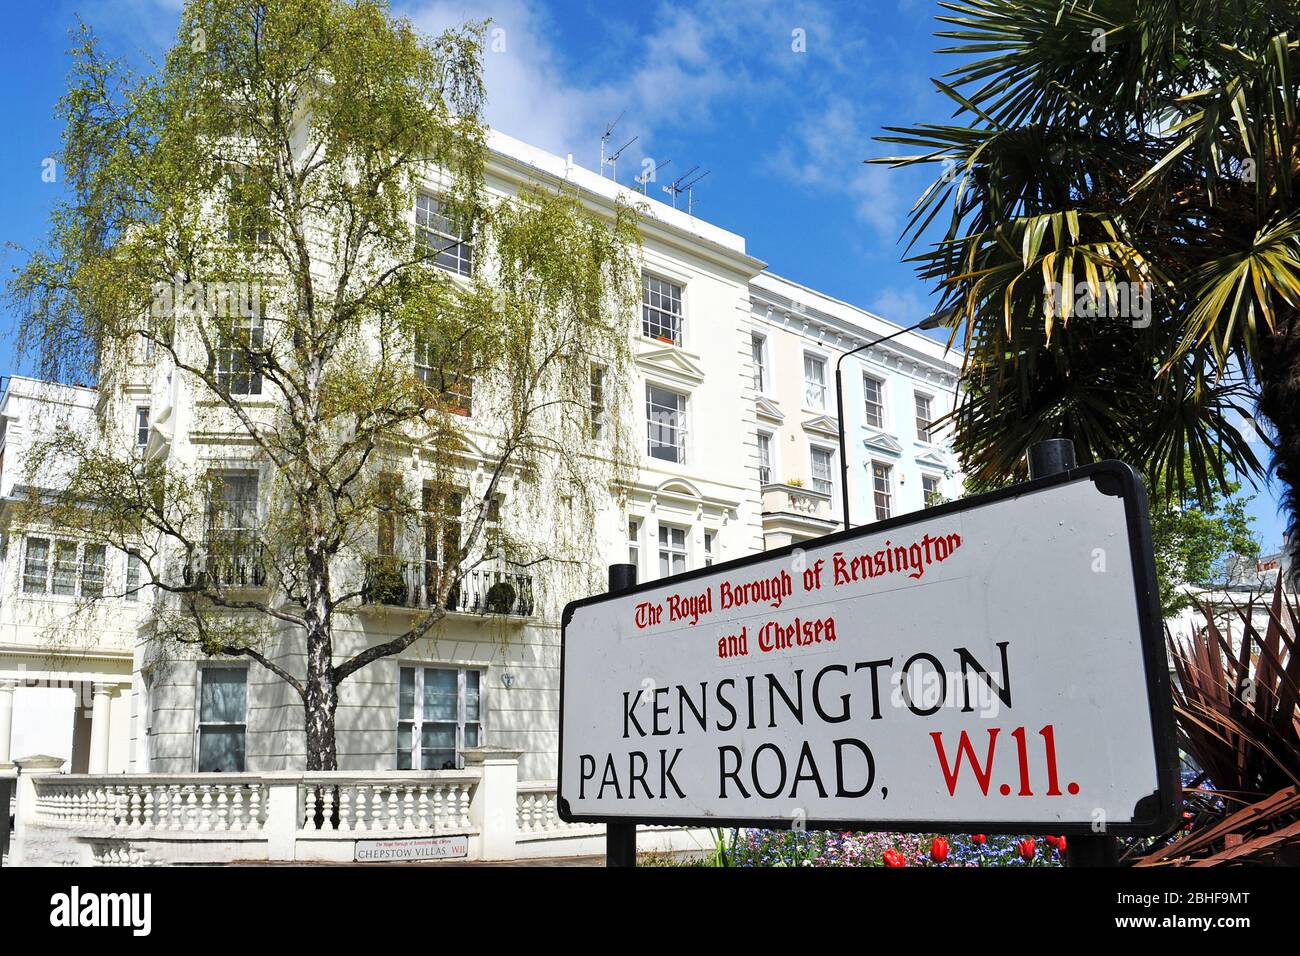 Kensington Park Road, London, United Kingdom. The road sign indicating the beginning of the elegant London neighborhood of Kensington Park Road. Stock Photo